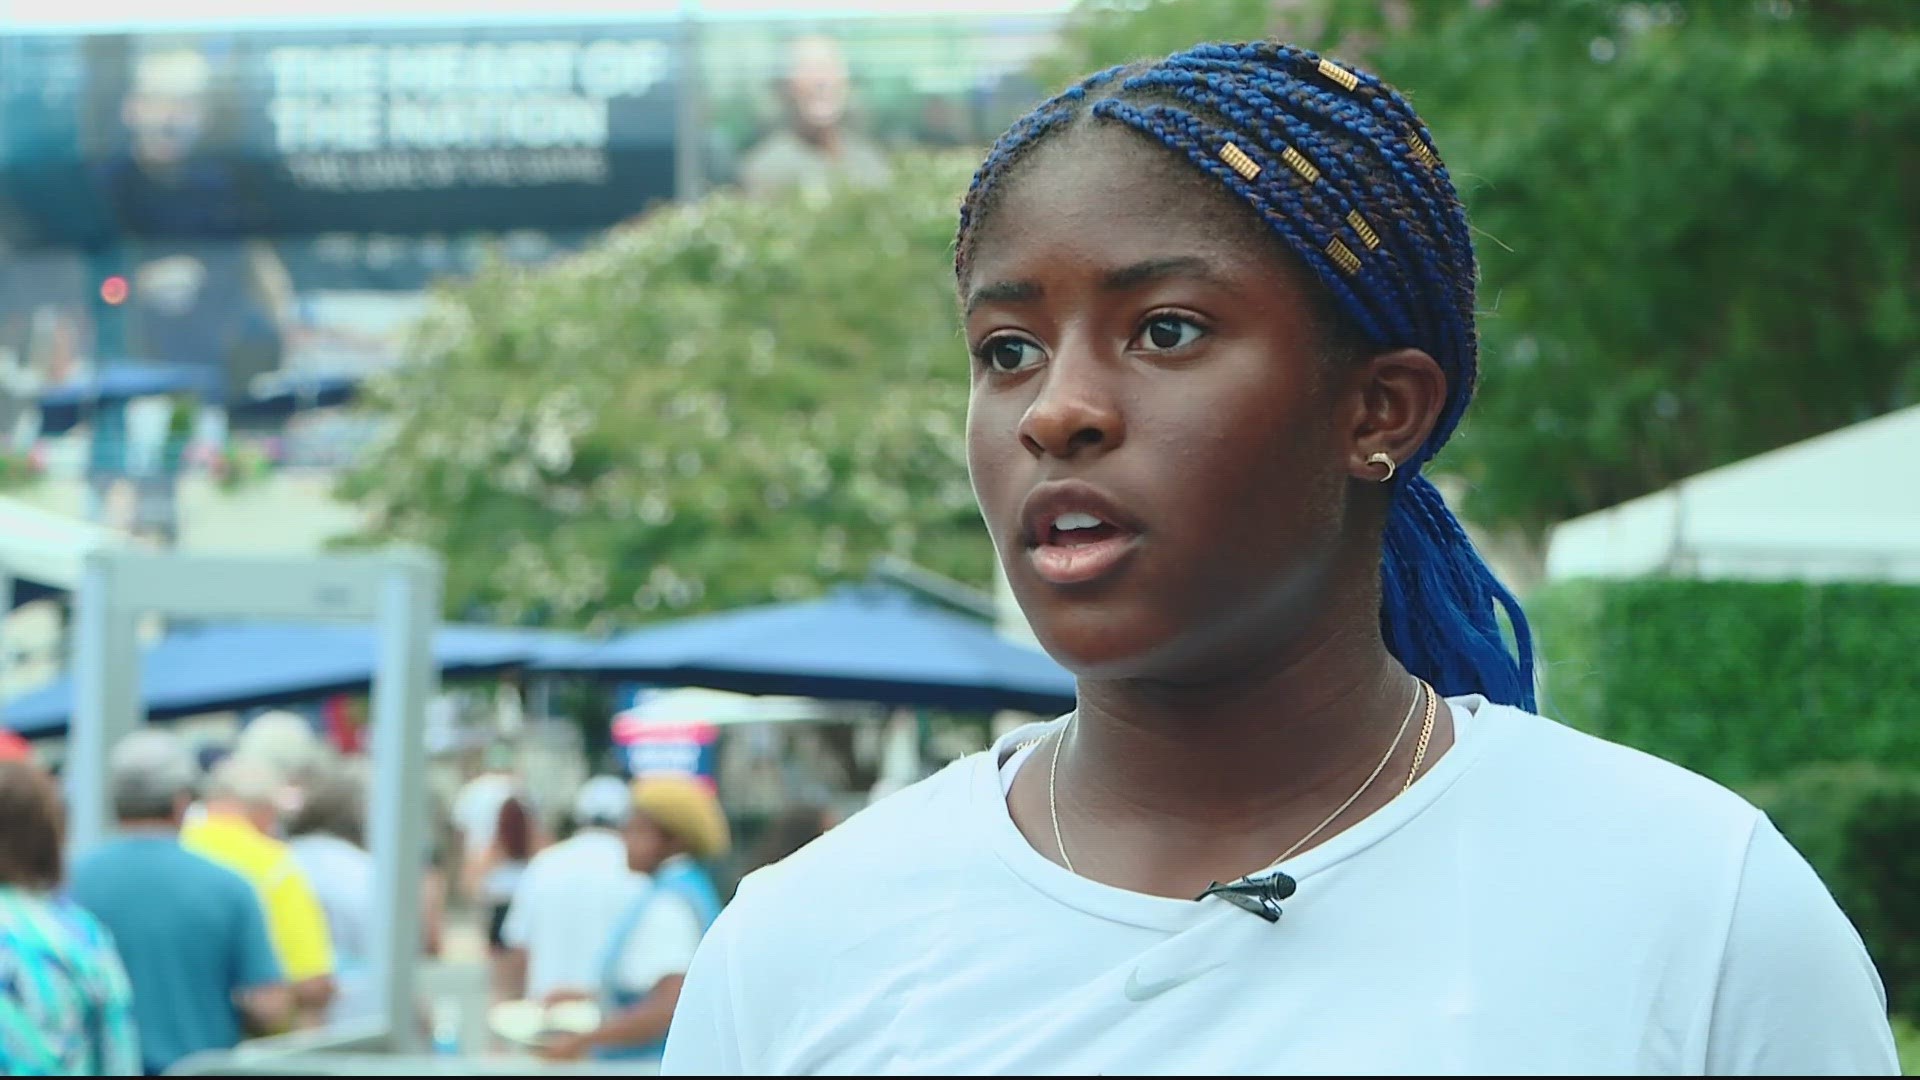 Clervie Ngounoue, 17, is sweeping her competition on the same courts where she found her love for tennis.